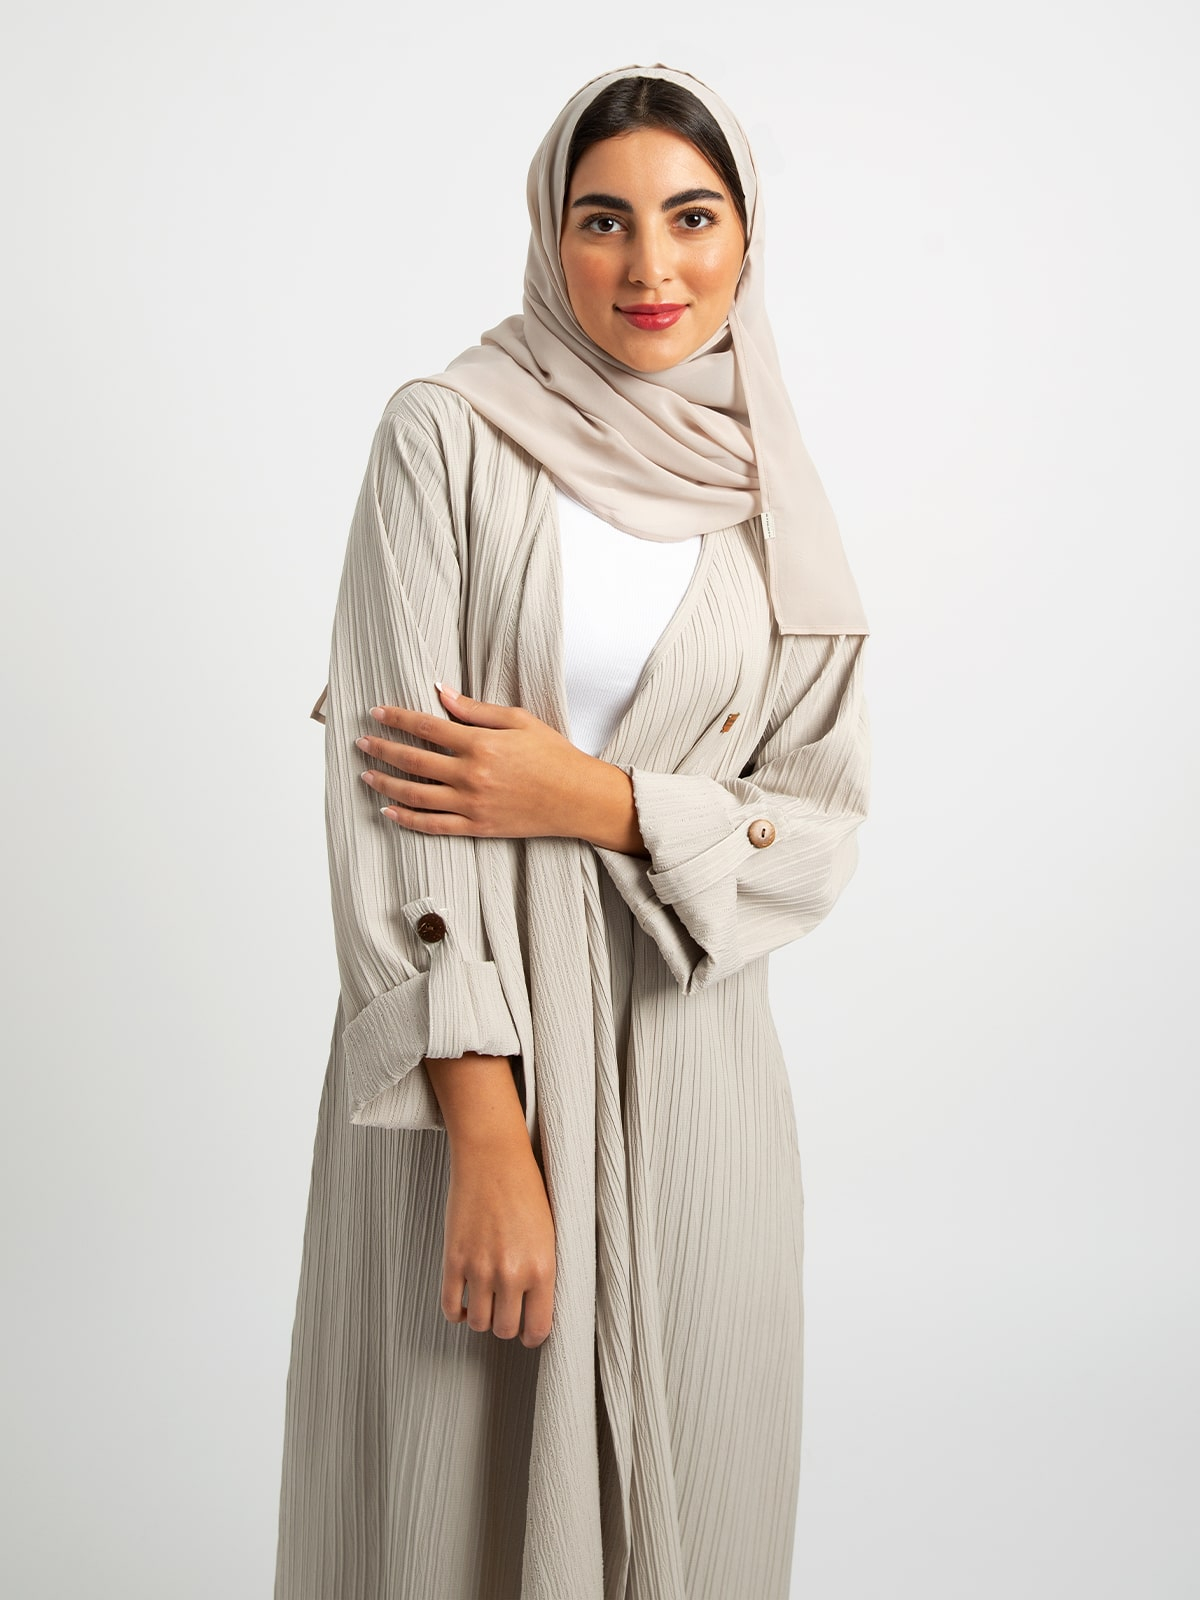 Kaafmeem women clothing regular fit latte comfy long abaya for everyday in wrinkle free fabric for work or outings